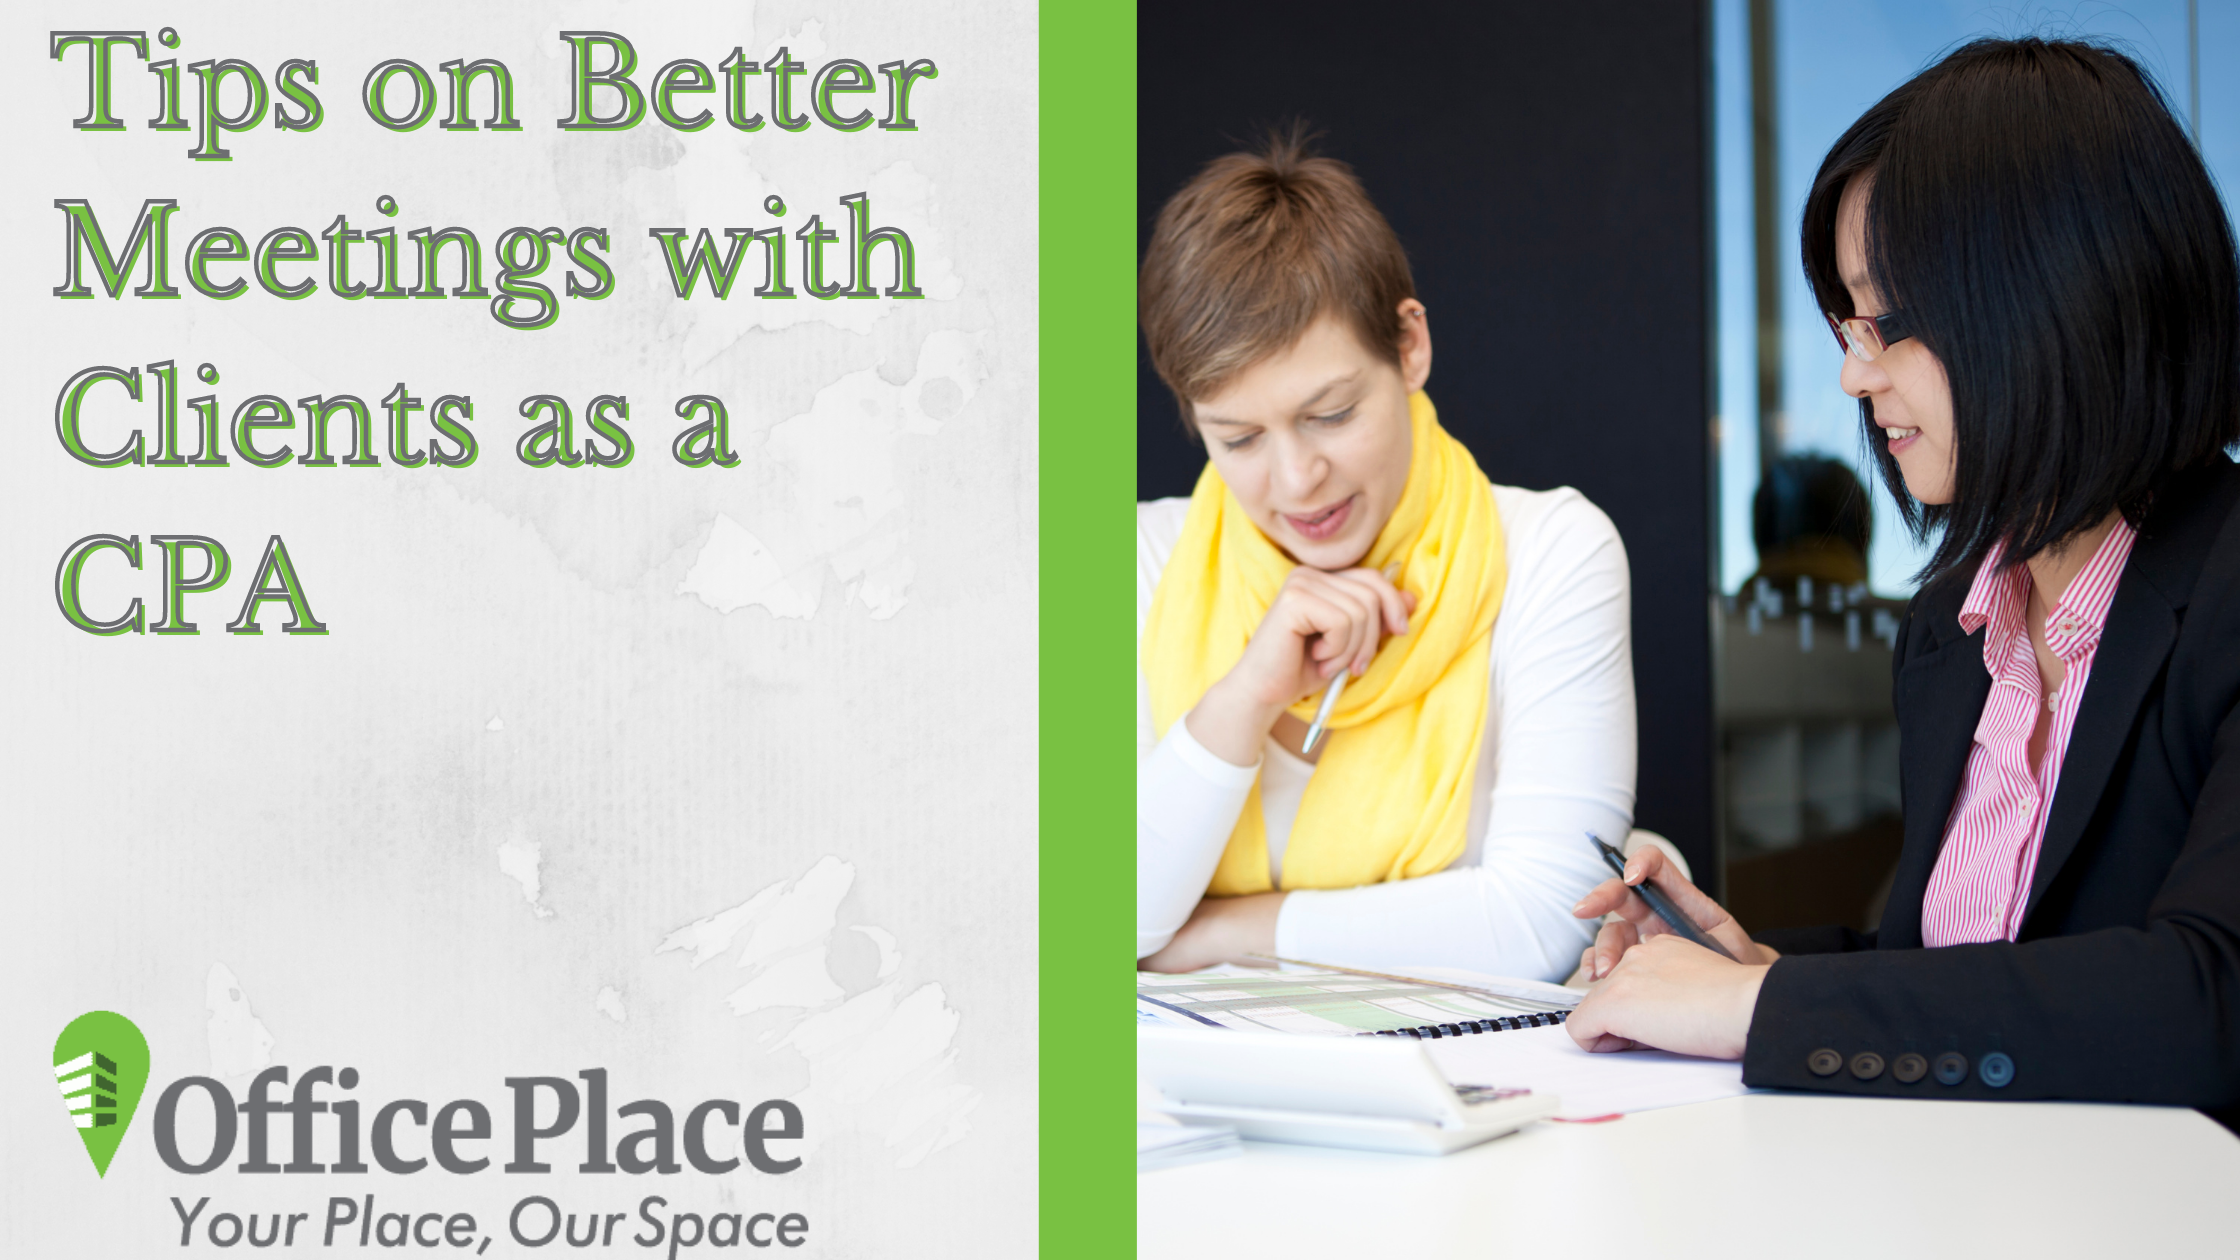 Tips on Better Meetings with Clients as a CPA